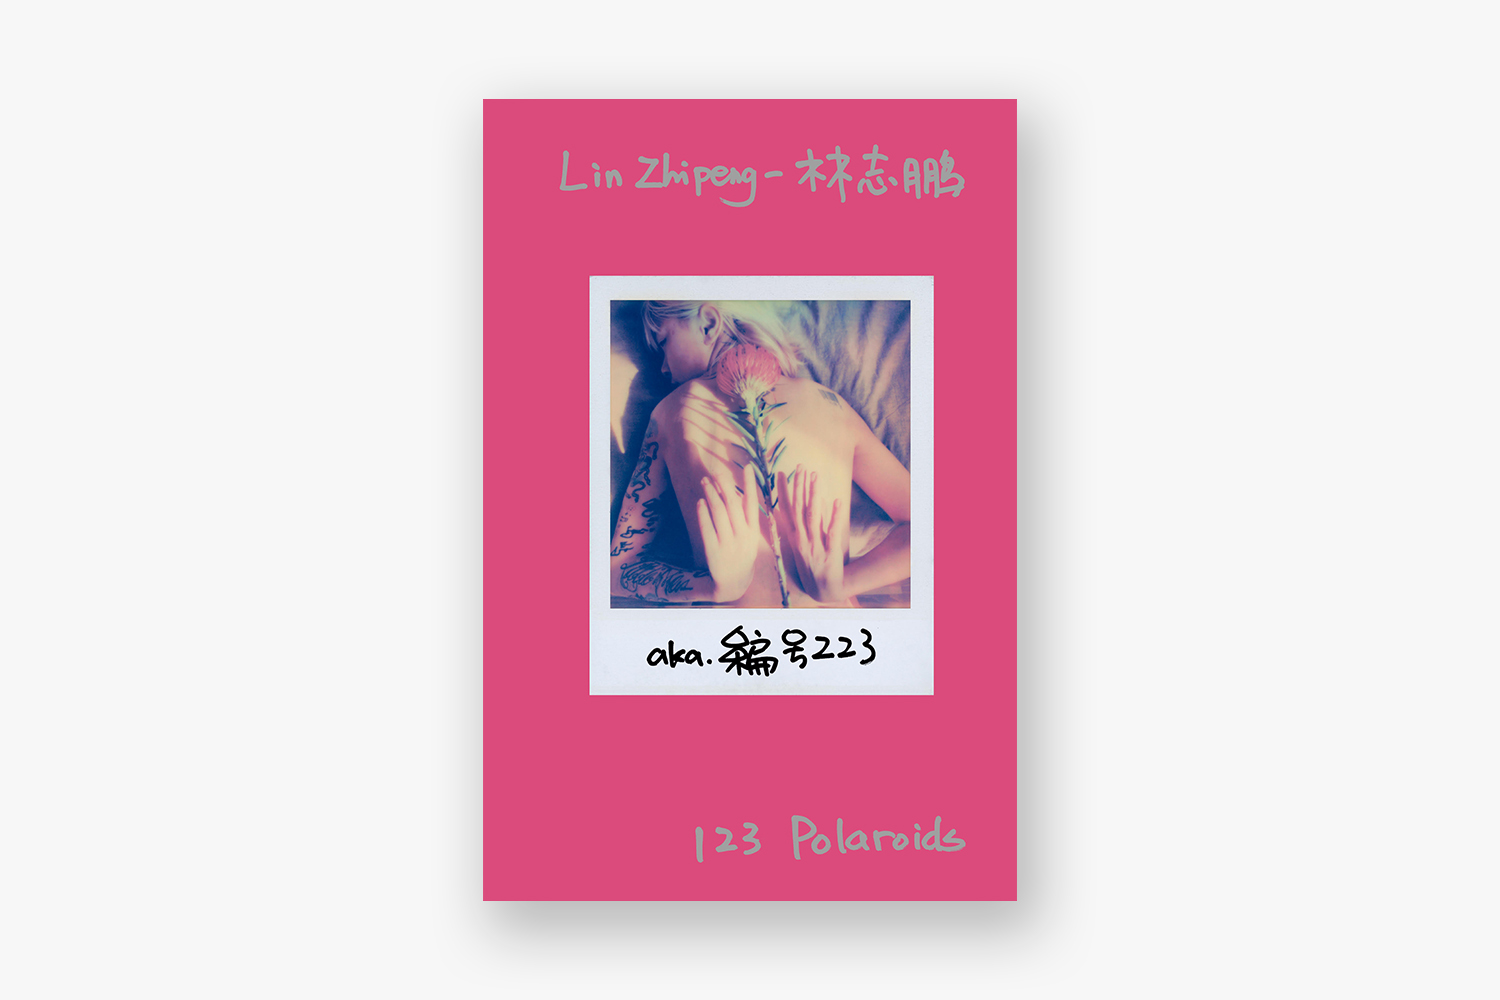 123 polaroids by lin zhipeng 223 book photography of china FINAL COVER